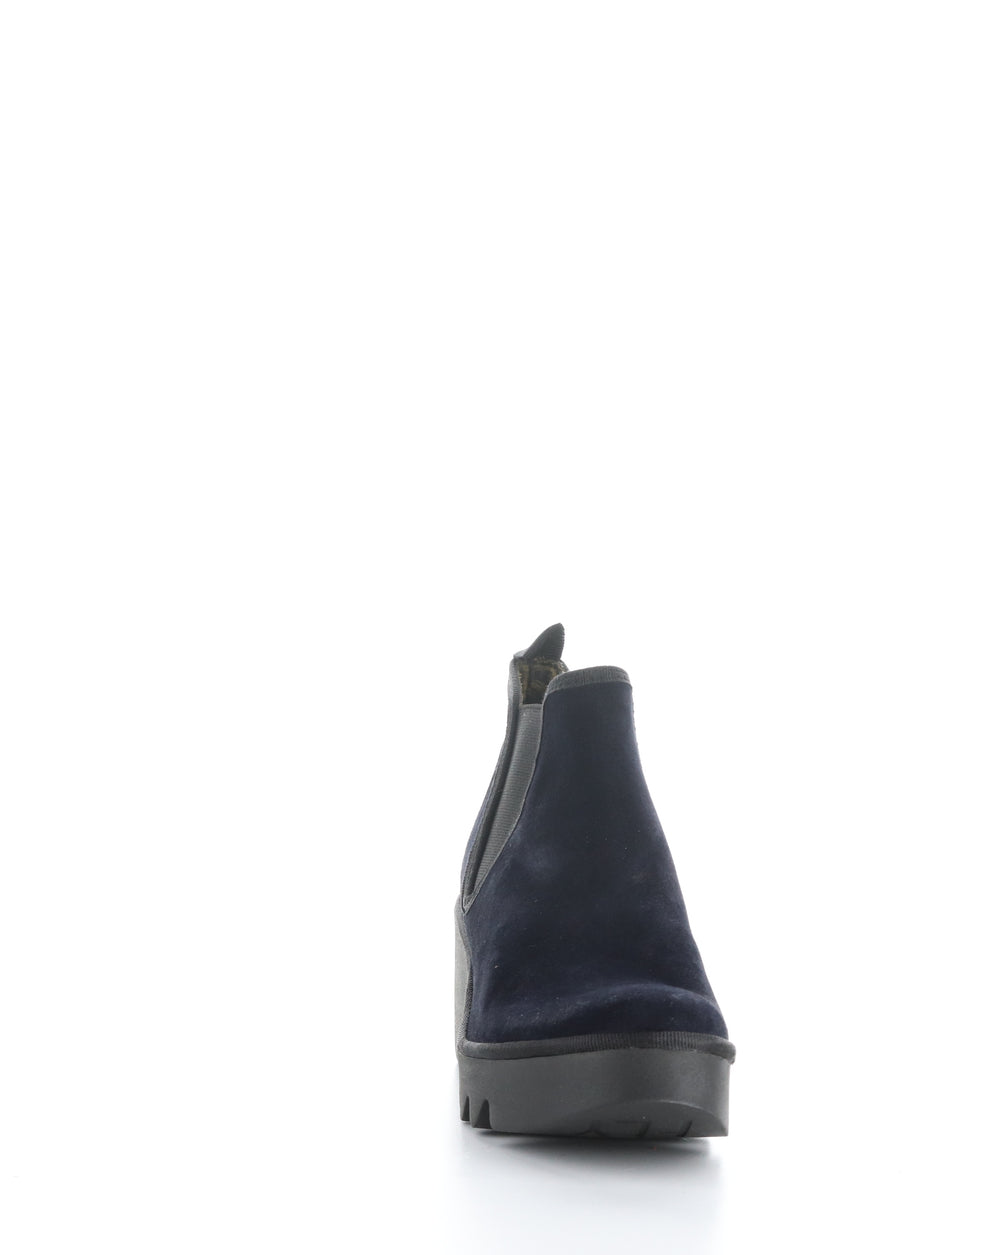 BYNE349FLY 023 NAVY Elasticated Boots